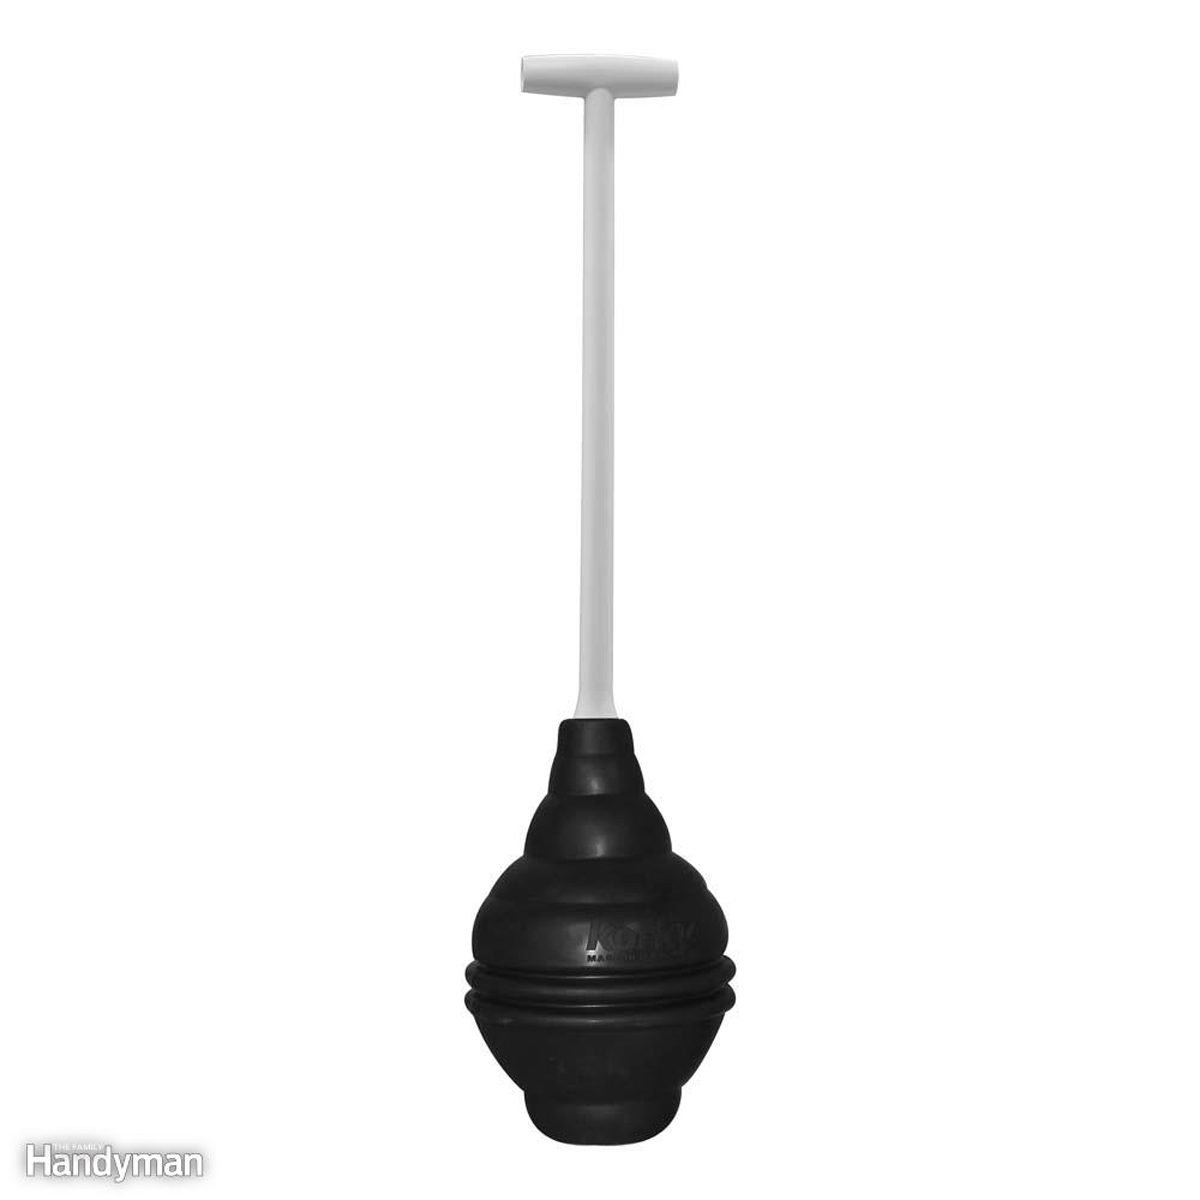 A Toilet Plunger to Love